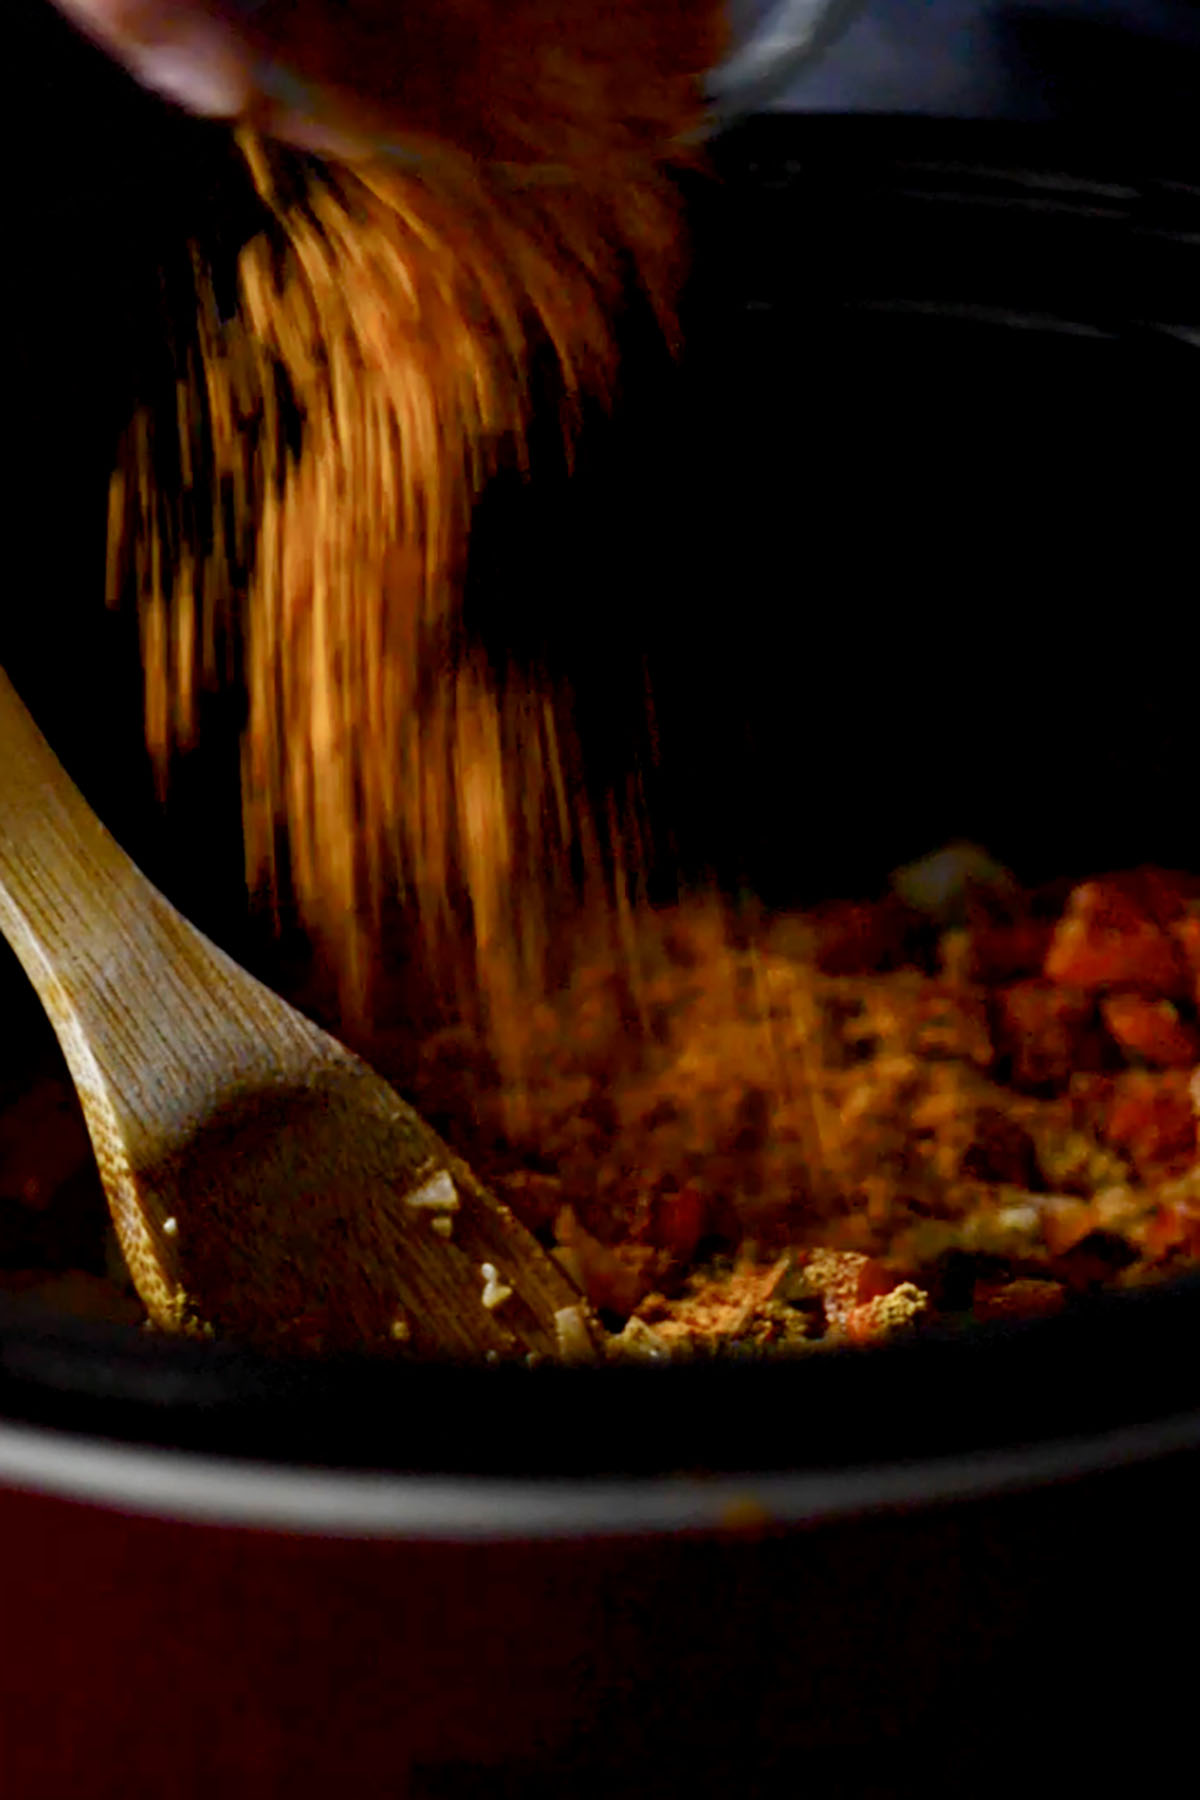 Seasonings and spices being added to a soup in the crock pot.